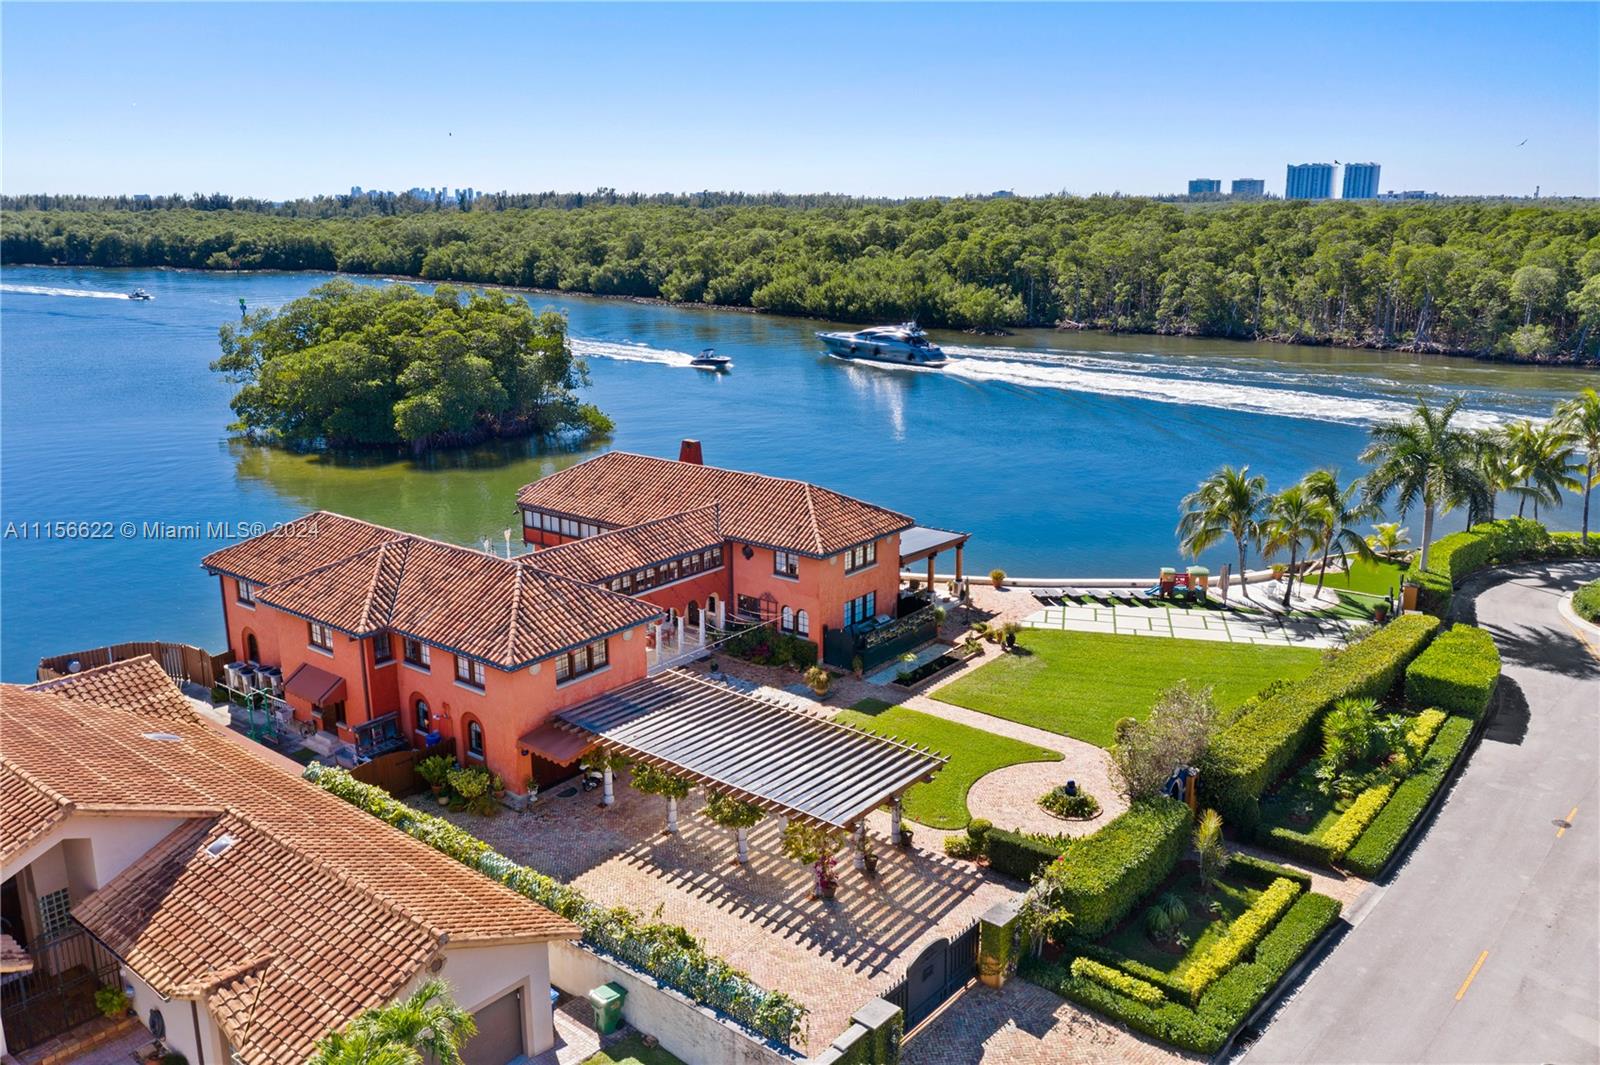 350’ waterfront with Boathouse